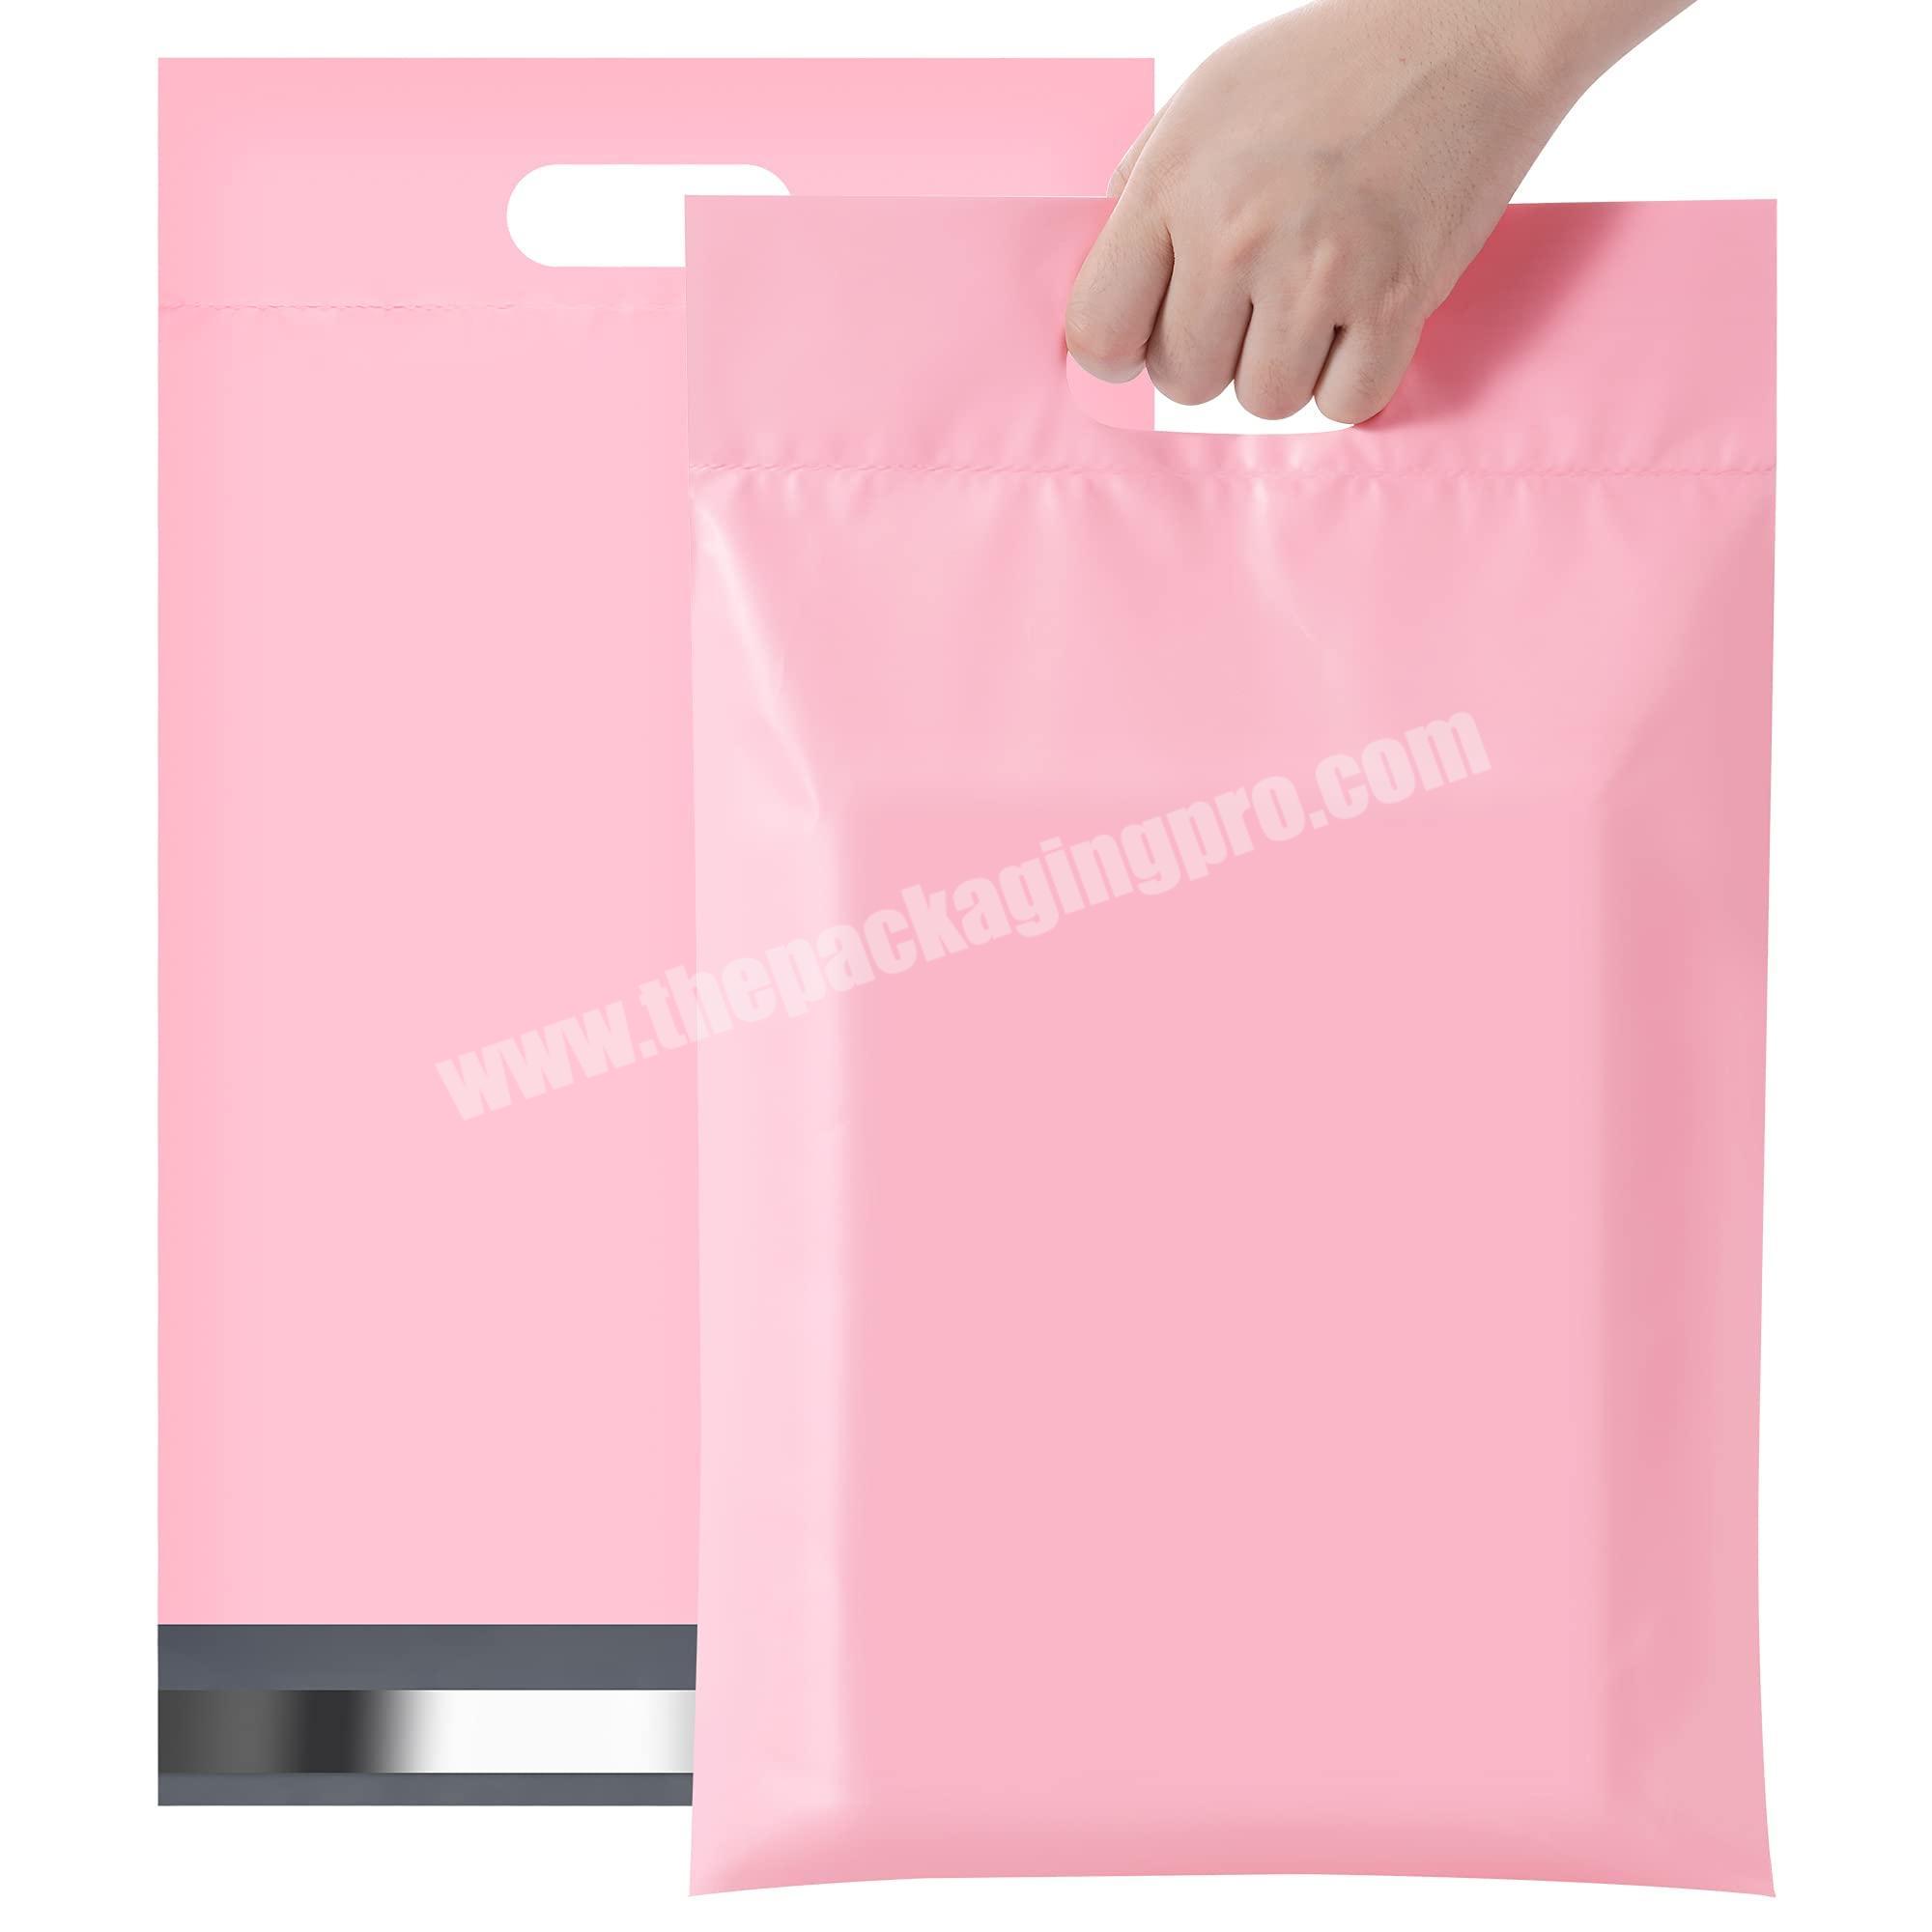 White Color Express Courier Bag Plastic Shipping Envelope Safety Plastic Material Origin Poly Bag for Clothing